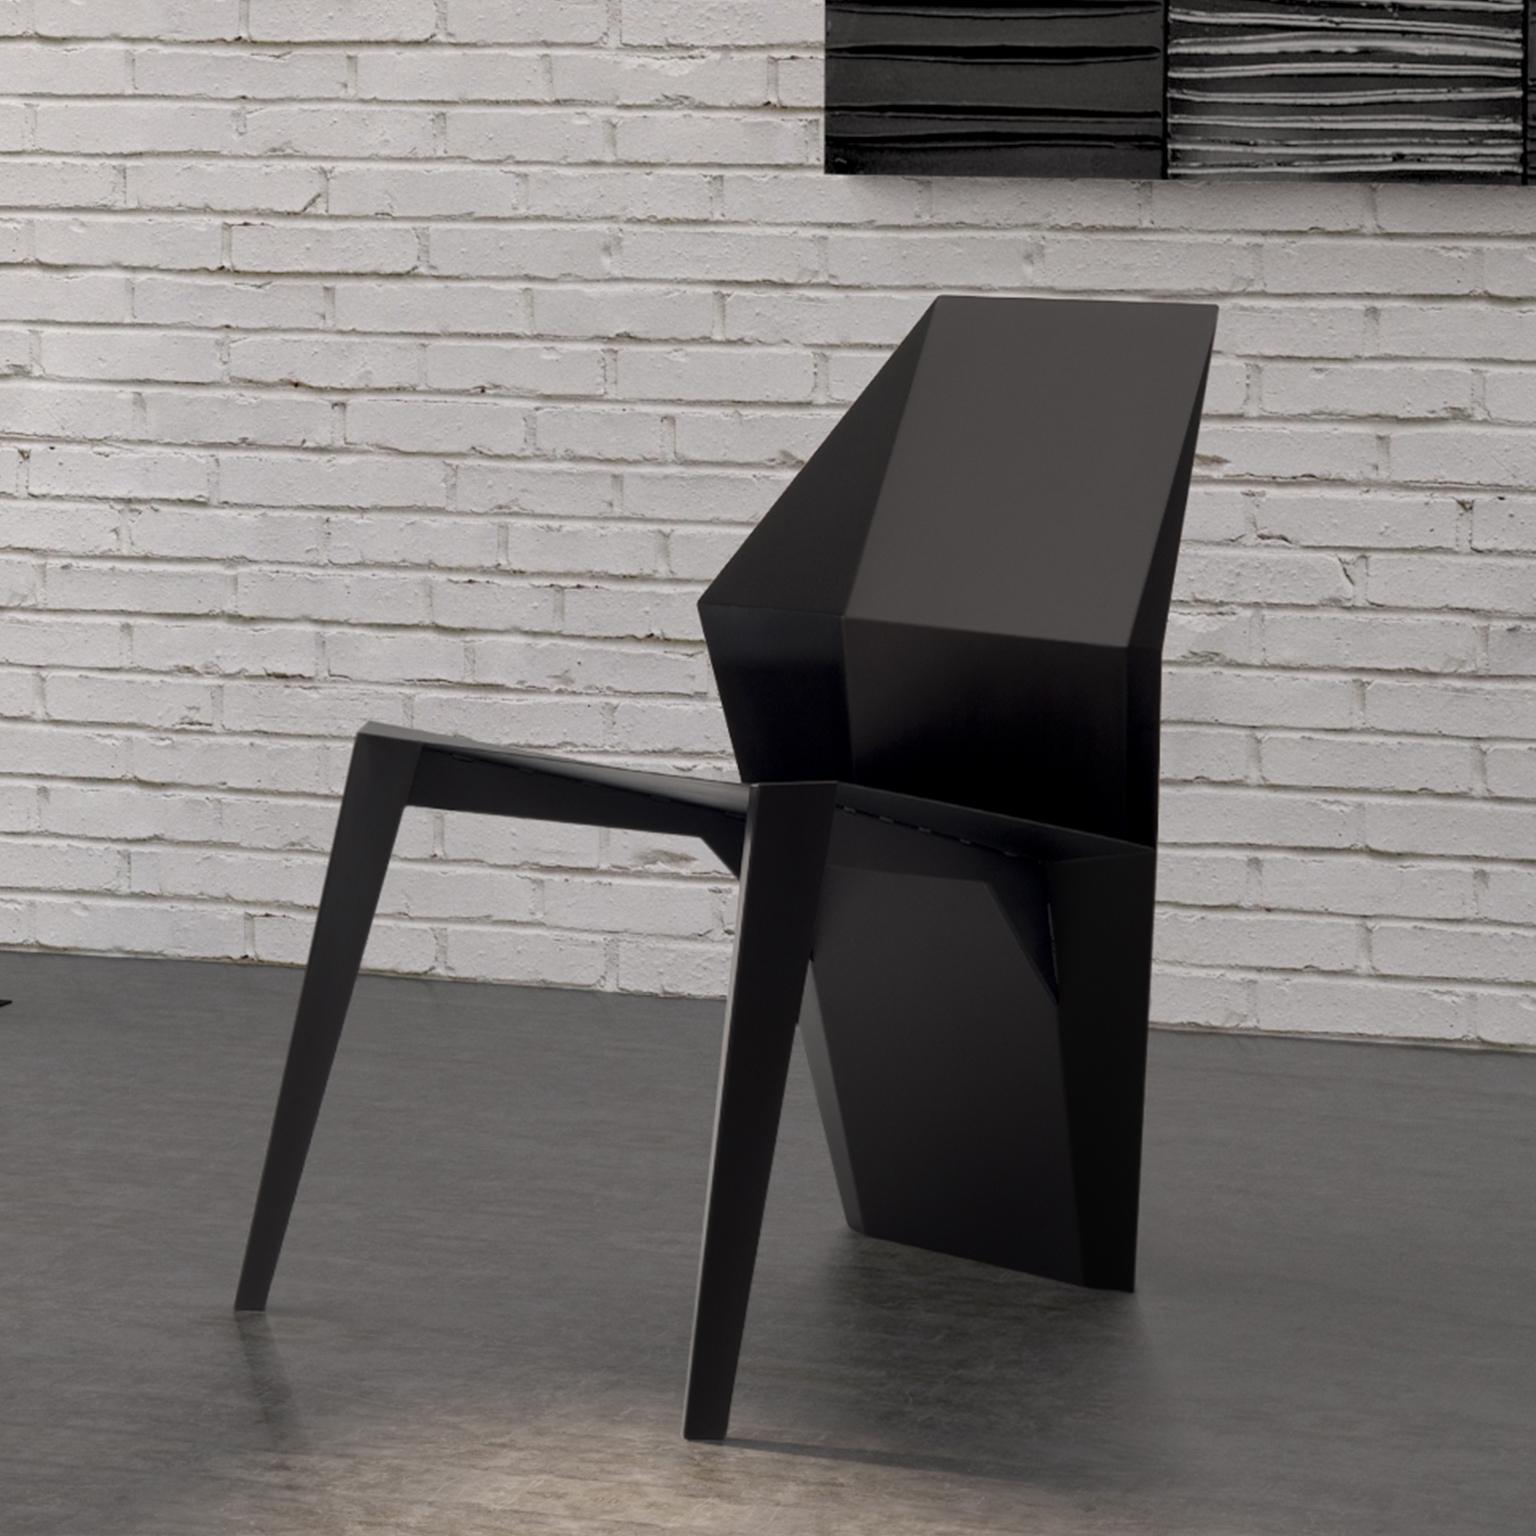 Centaurus Sculptural Chair with soft-touch powder coated finish 3